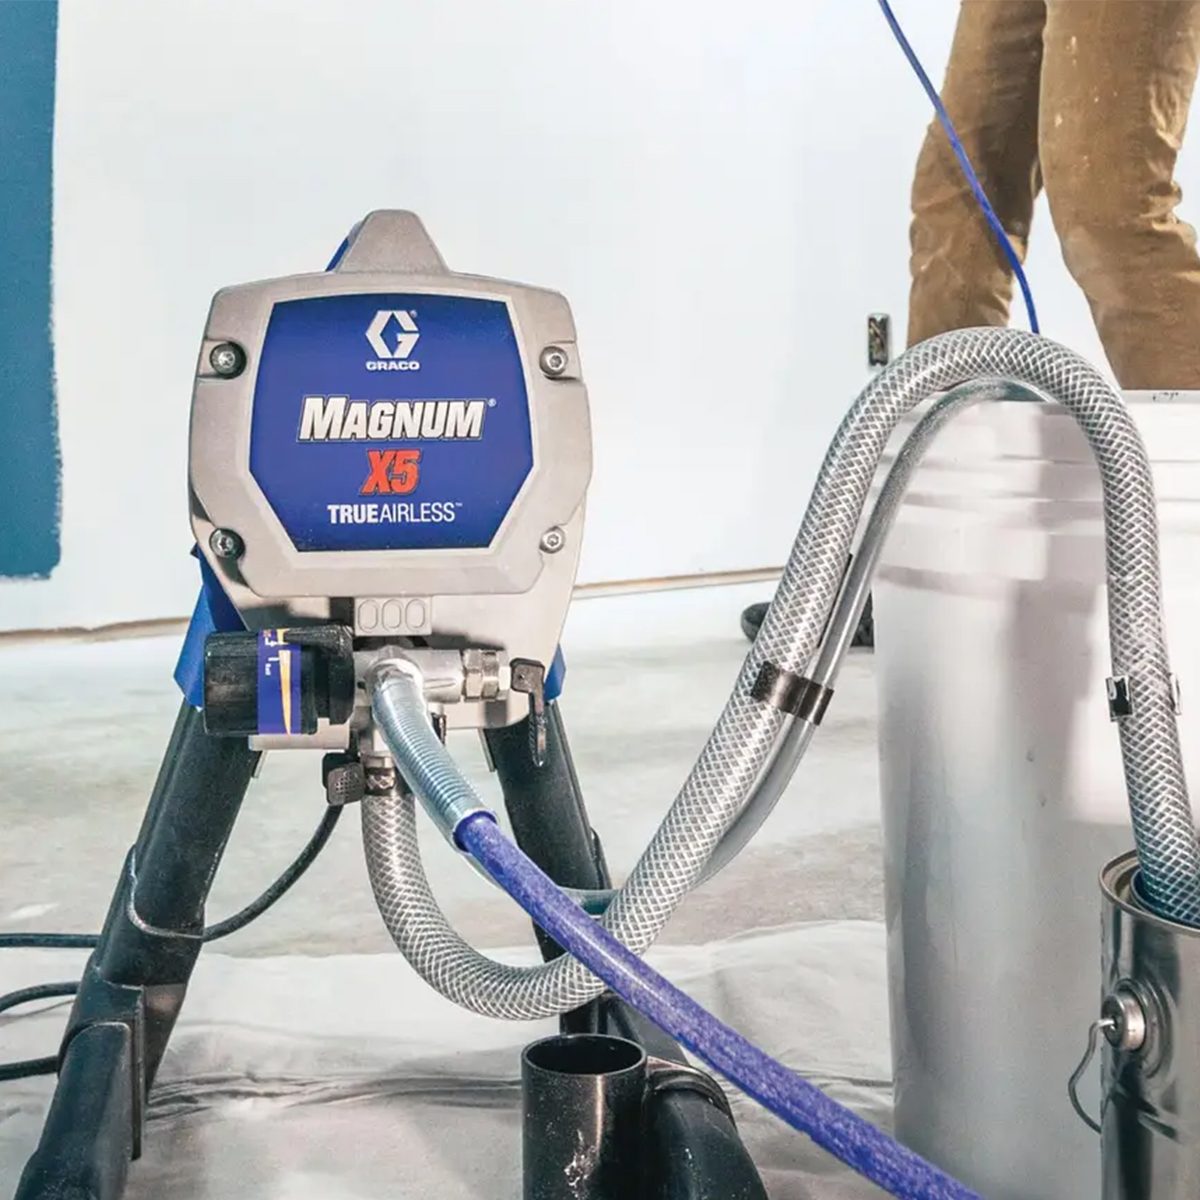 Painting / Remediation : AIRLESS PAINT SPRAYER